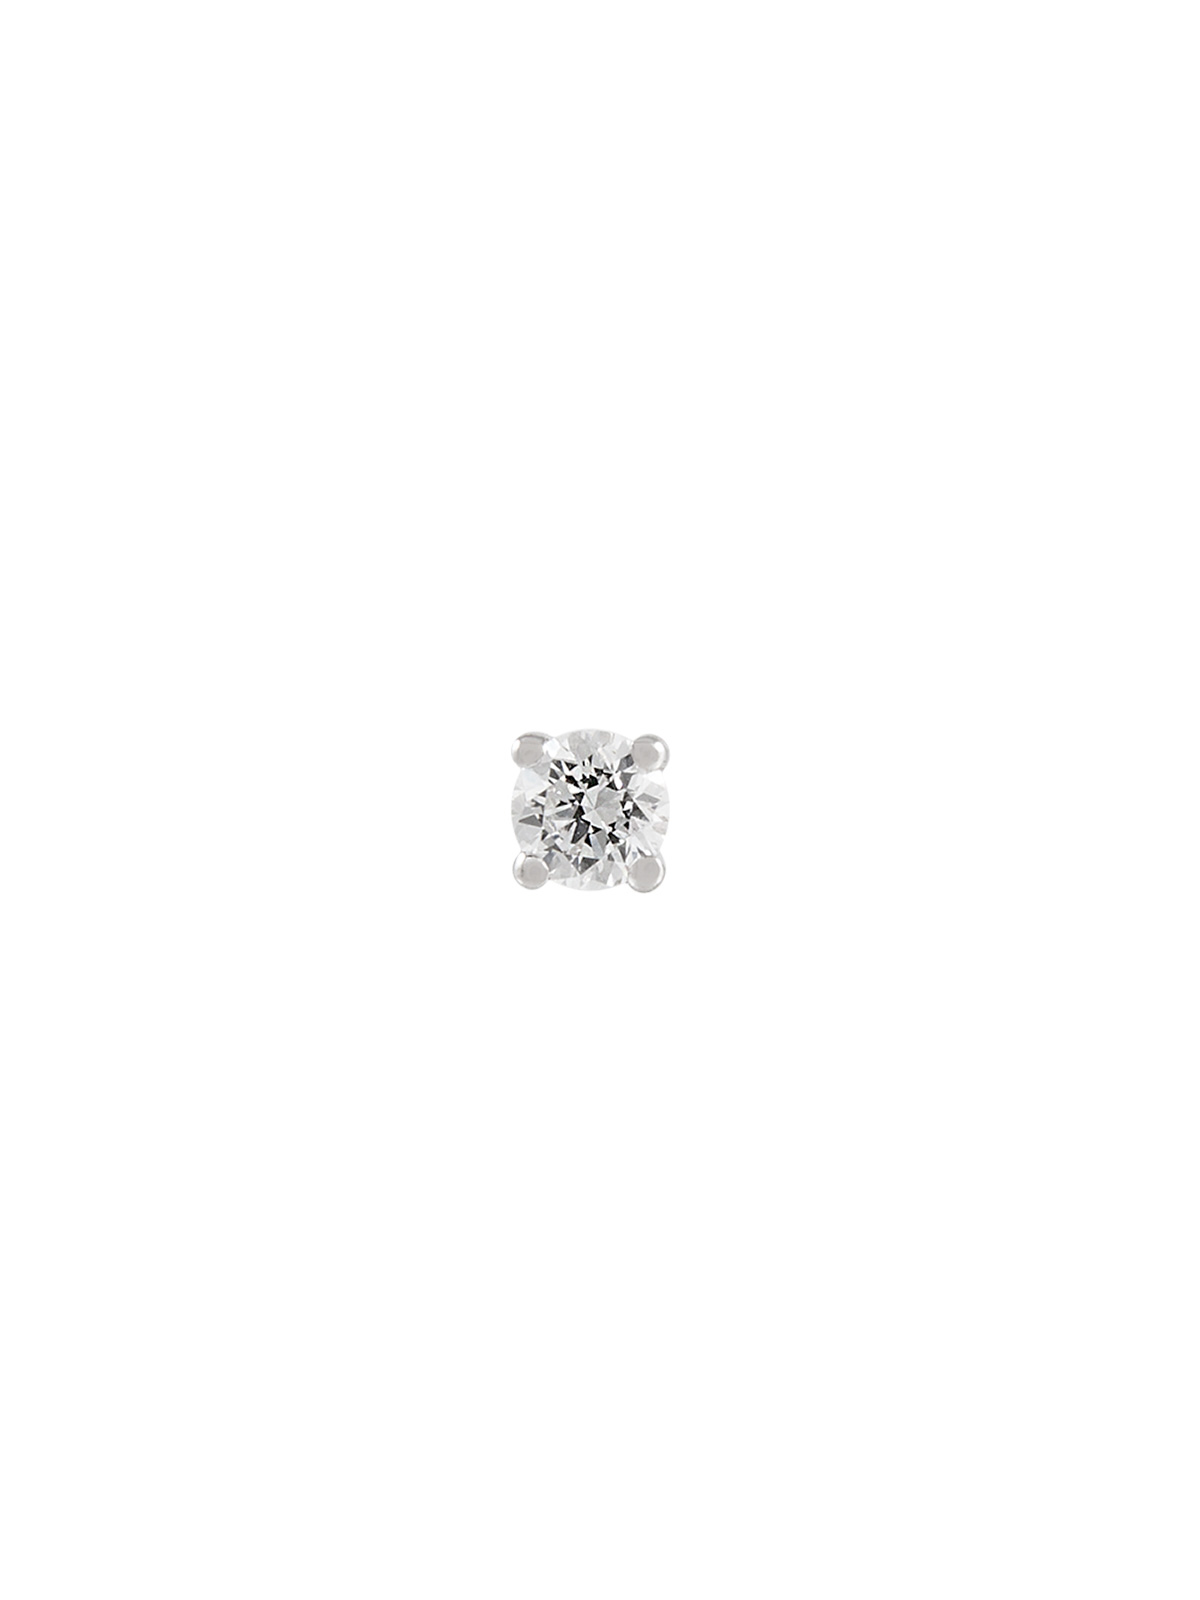 Individual white gold earring with 0.03ct diamond